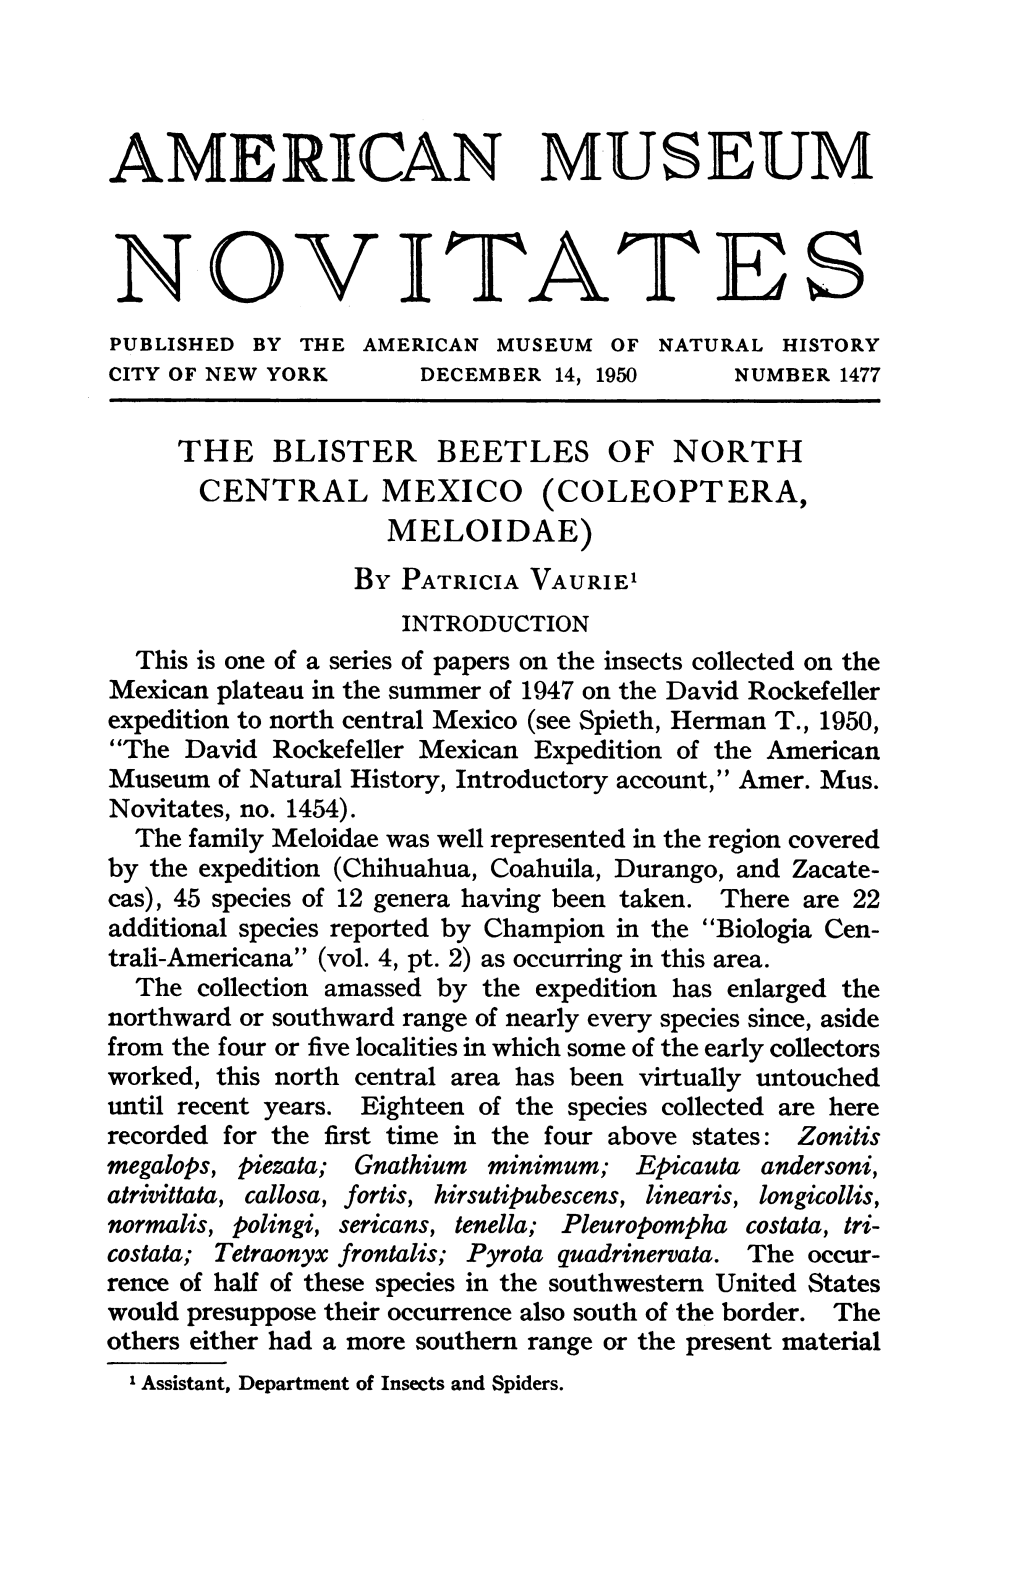 Novitates Published by the American Museum of Natural History City of New York December 14, 1950 Number 1477